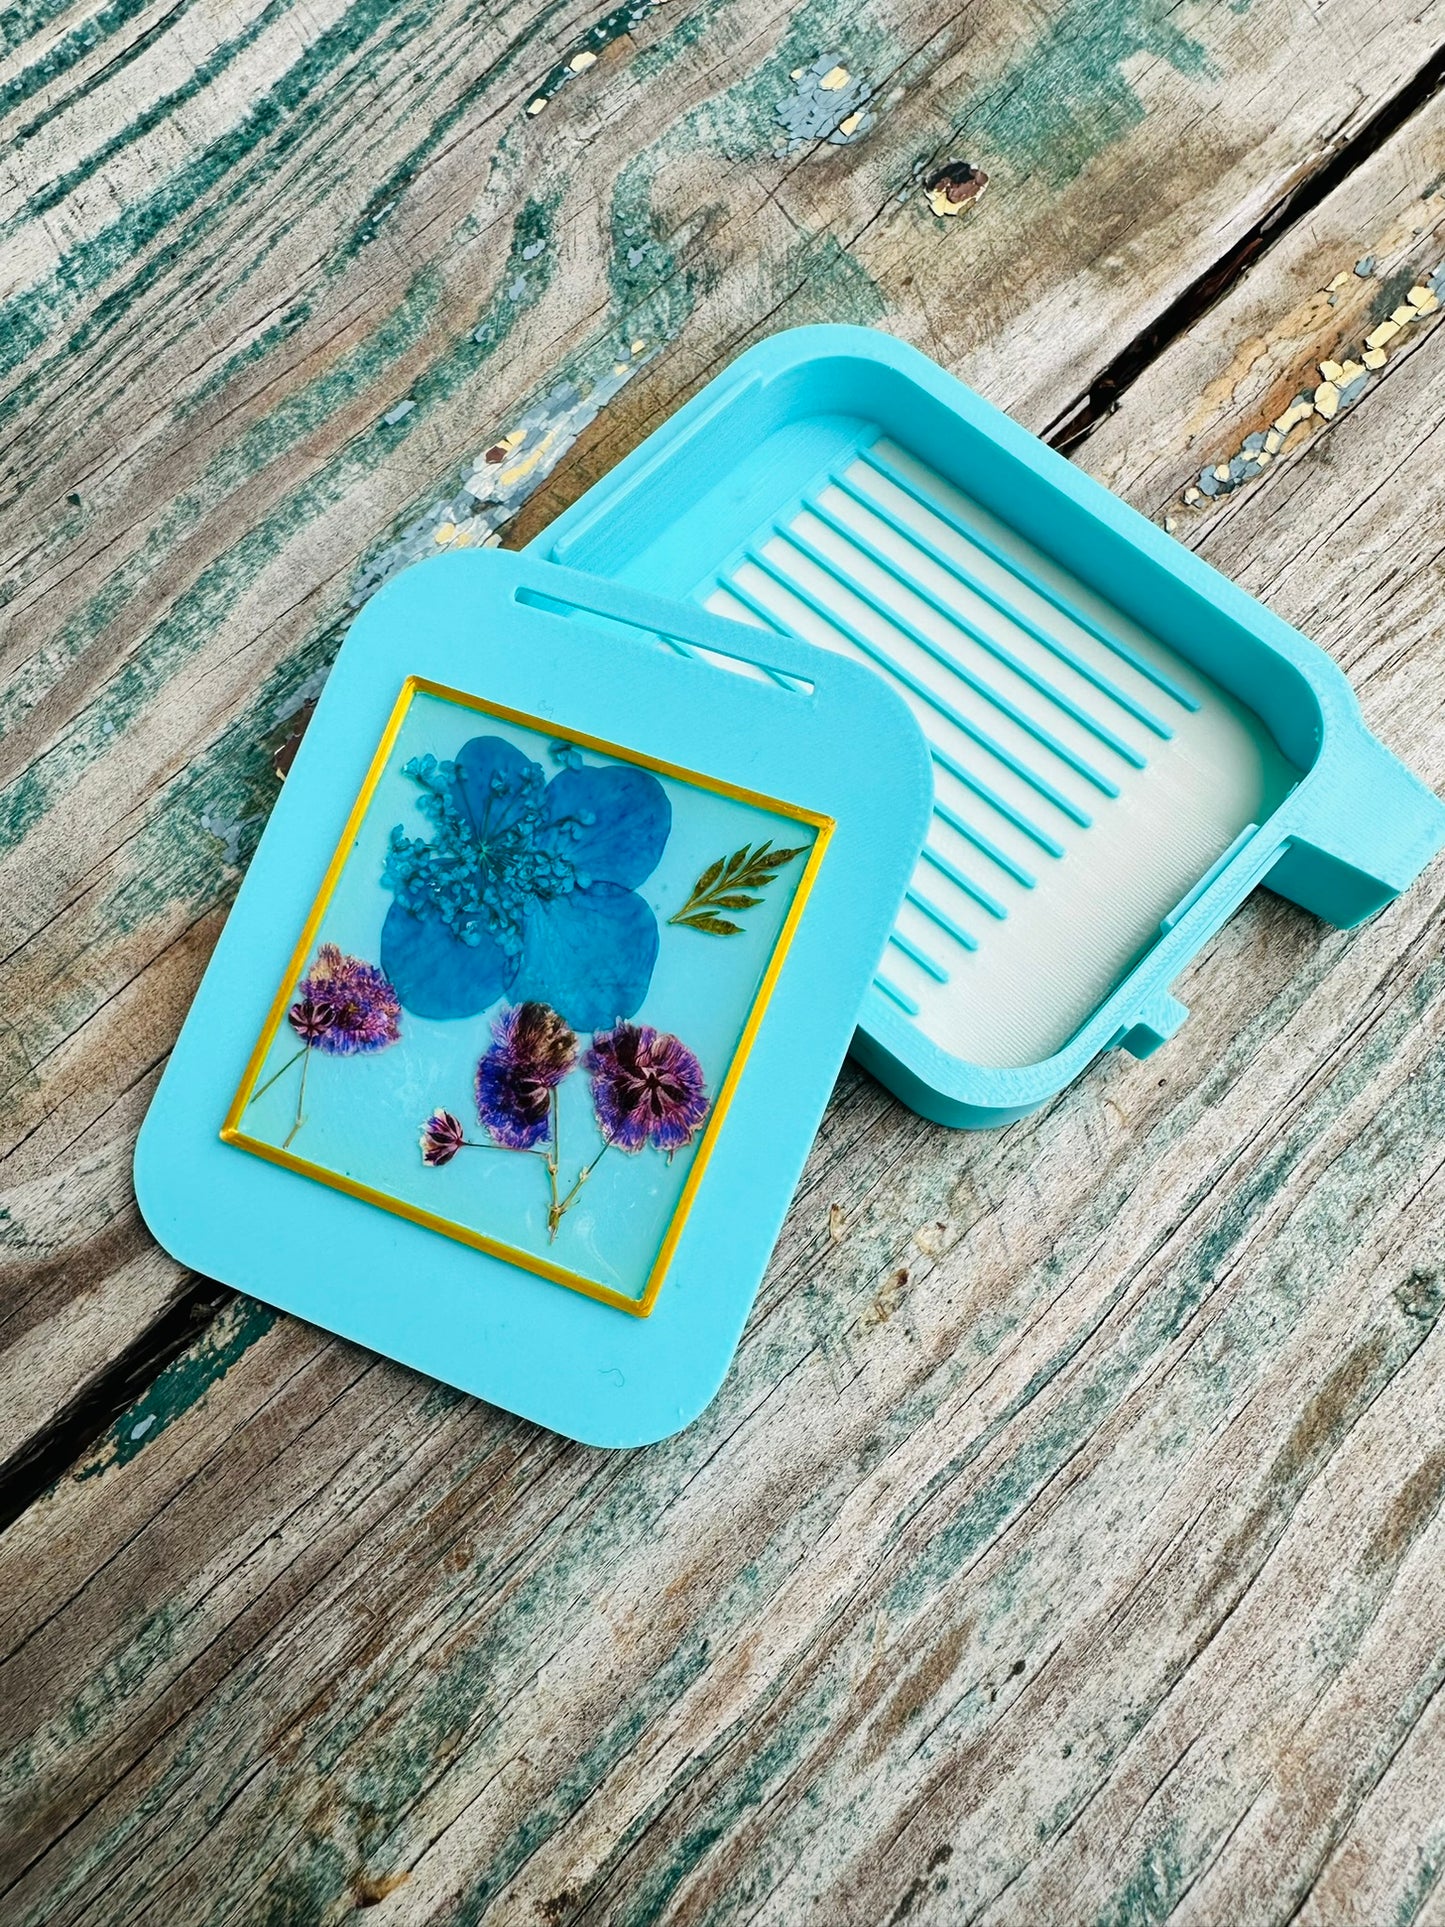 Small Silver Diamond Art Tray- Blue with Flowers